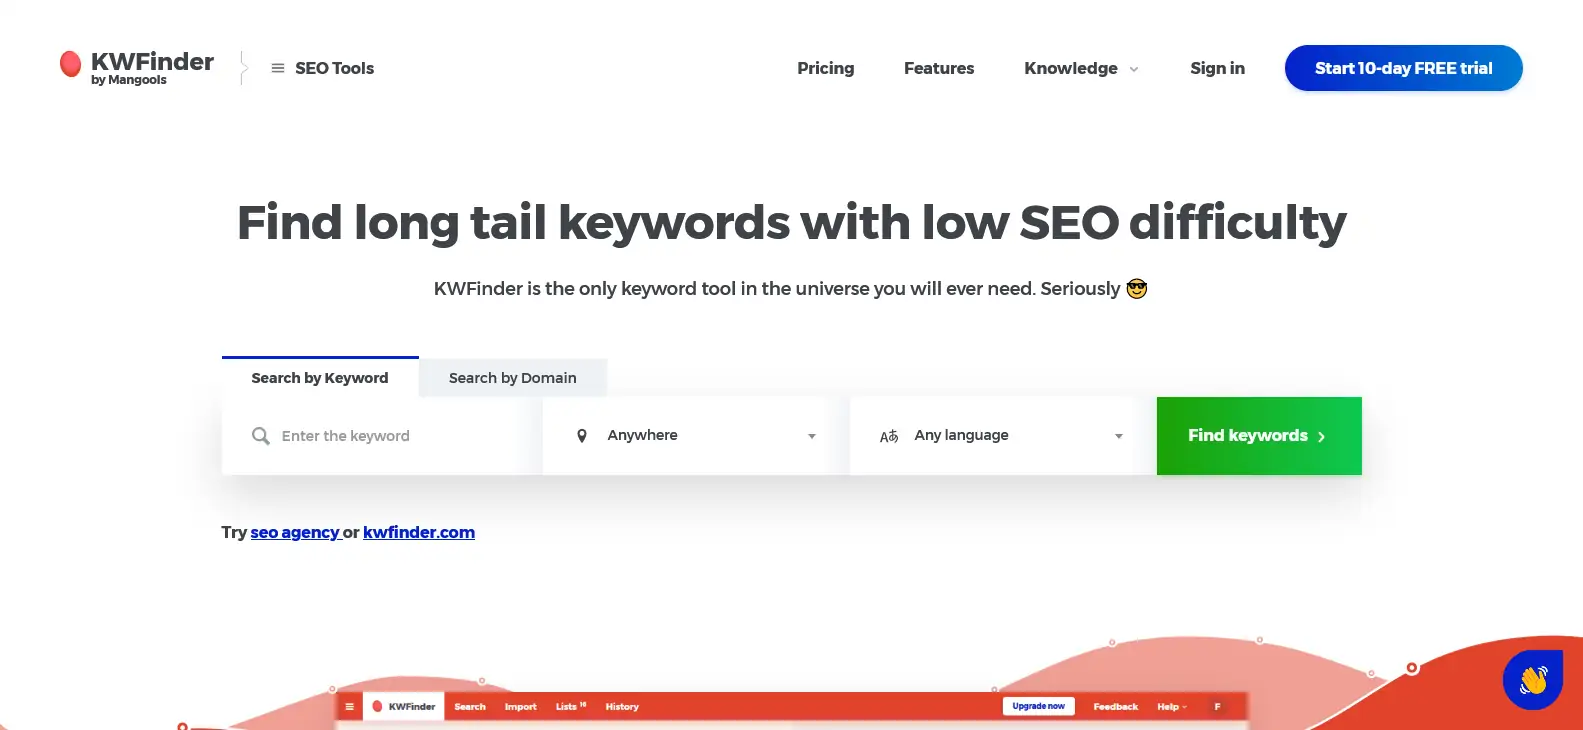 KWFinder The Only Keyword Tool Youll Ever Need - SEO Tools: 18 SEO Tools Used by SEO Experts